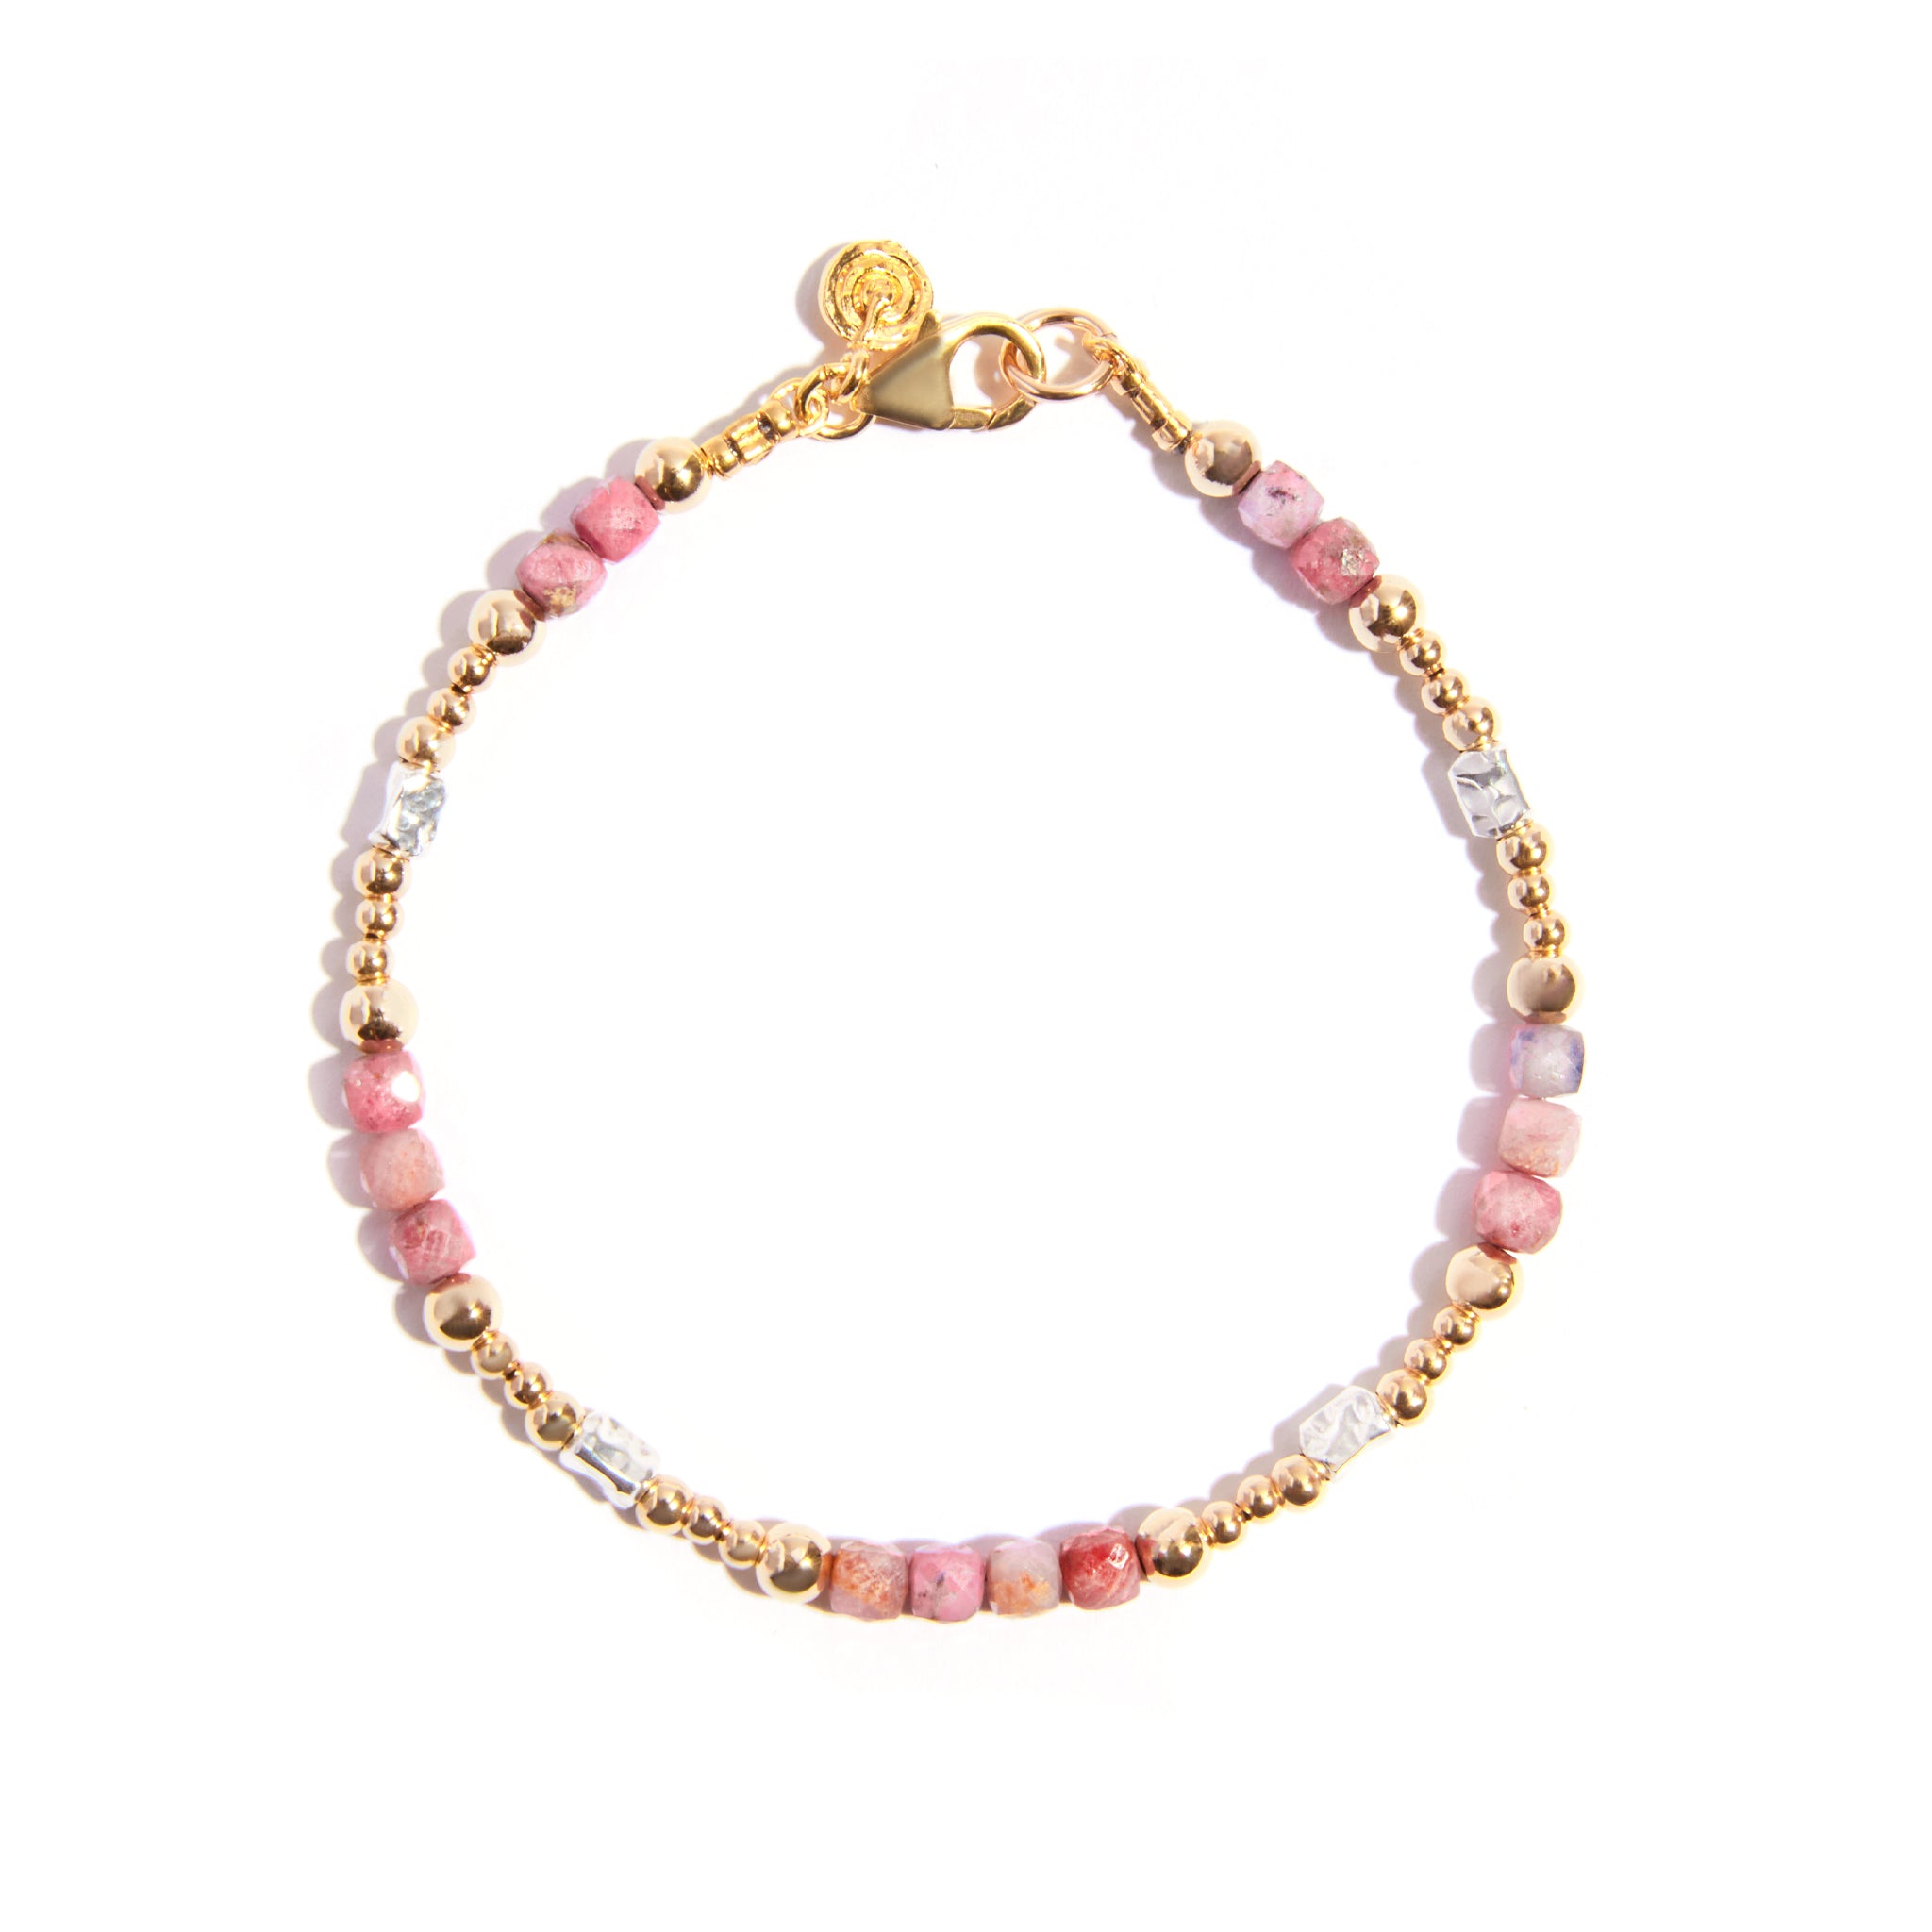 This stunning Rose Tourmaline Bracelet bracelet features high-quality rose tourmaline beads complemented by 14ct gold-filled and premium silver accents.